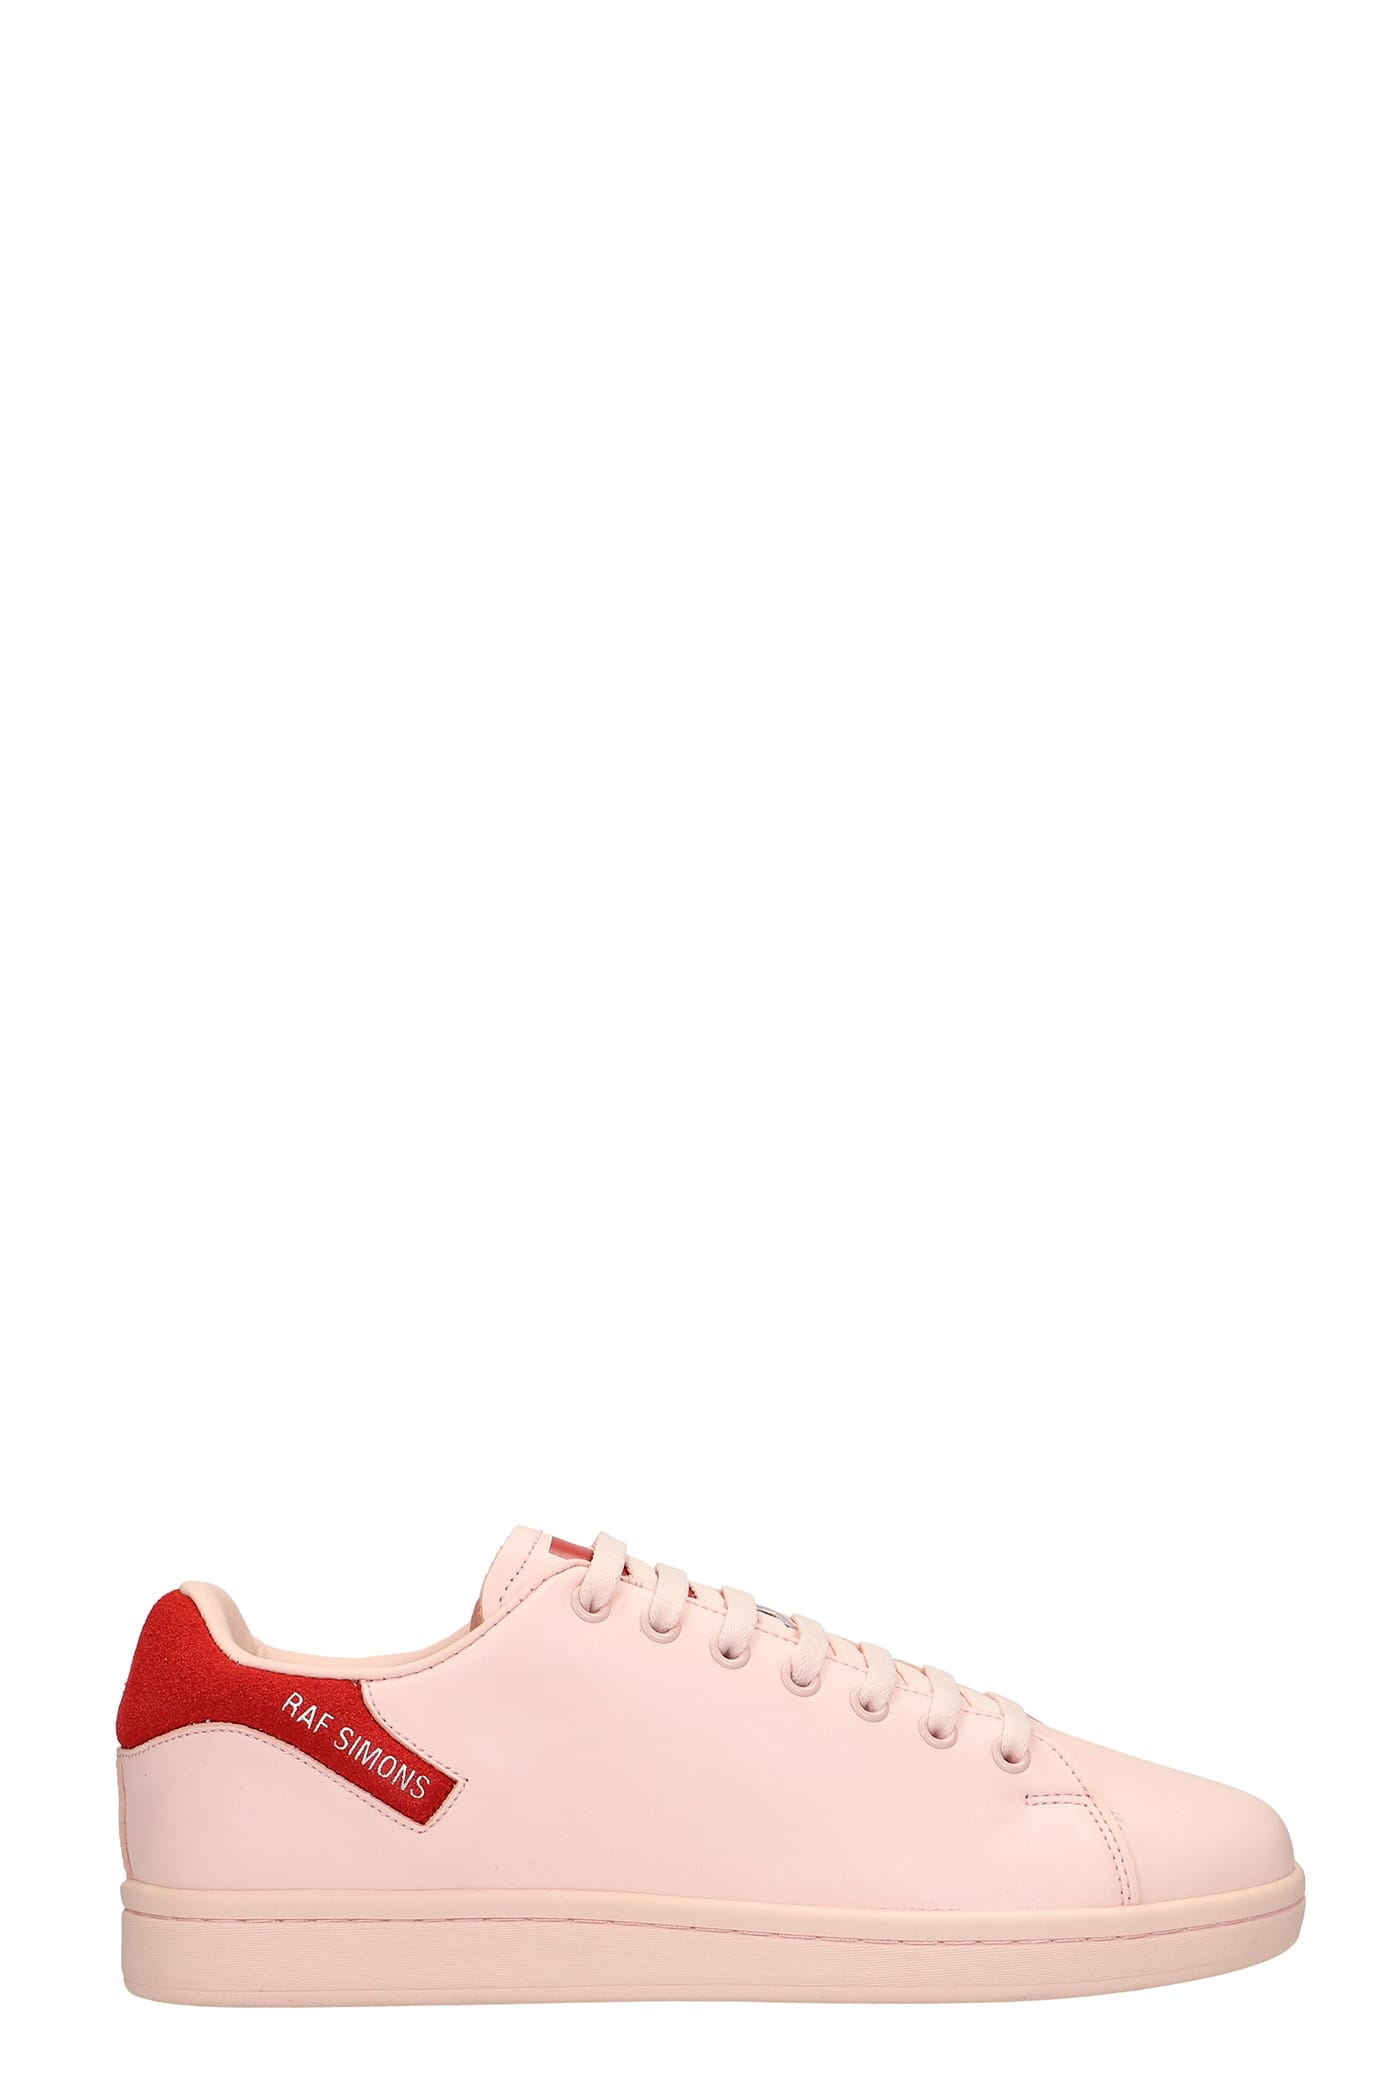 Raf Simons Orion Sneakers In Rose-pink Leather